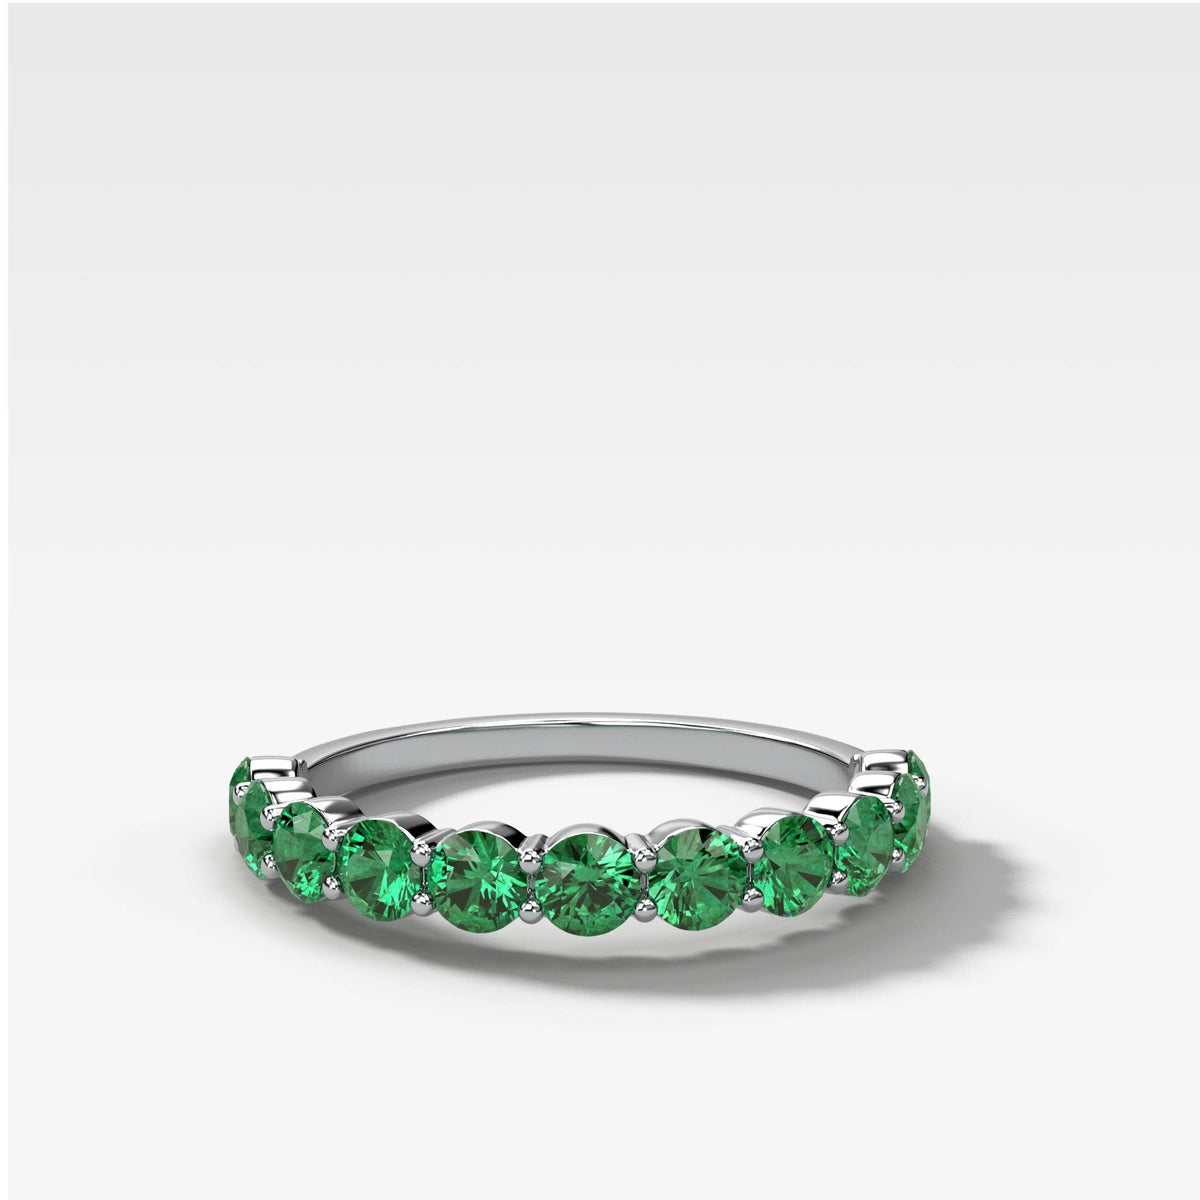 Shared Prong Stacker With Green Emeralds by Good Stone in White Gold